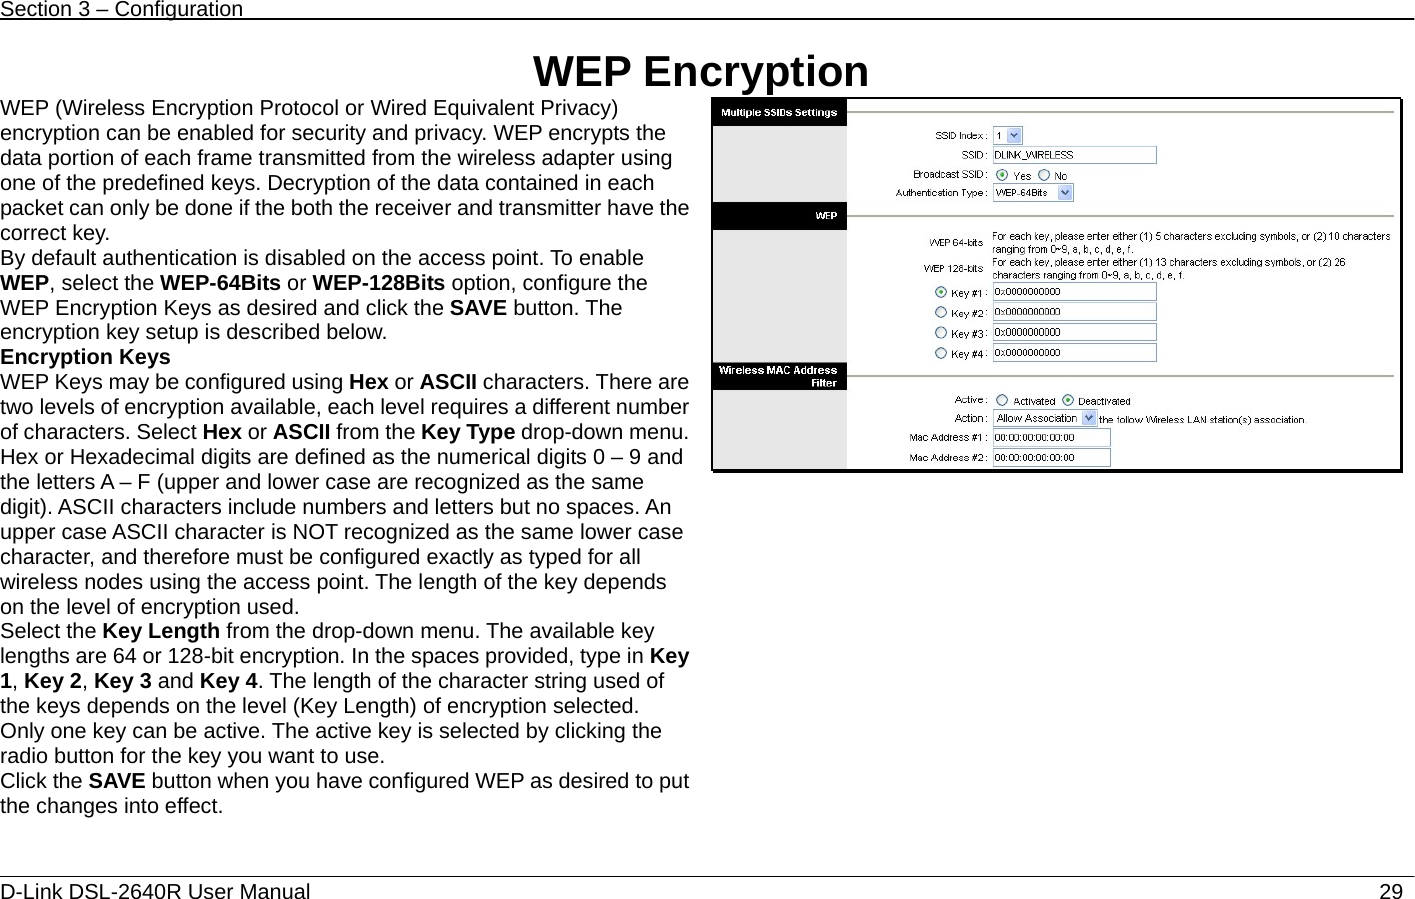 Section 3 – Configuration   D-Link DSL-2640R User Manual                           29WEP Encryption WEP (Wireless Encryption Protocol or Wired Equivalent Privacy) encryption can be enabled for security and privacy. WEP encrypts the data portion of each frame transmitted from the wireless adapter using one of the predefined keys. Decryption of the data contained in each packet can only be done if the both the receiver and transmitter have the correct key.   By default authentication is disabled on the access point. To enable WEP, select the WEP-64Bits or WEP-128Bits option, configure the WEP Encryption Keys as desired and click the SAVE button. The encryption key setup is described below. Encryption Keys WEP Keys may be configured using Hex or ASCII characters. There are two levels of encryption available, each level requires a different number of characters. Select Hex or ASCII from the Key Type drop-down menu. Hex or Hexadecimal digits are defined as the numerical digits 0 – 9 and the letters A – F (upper and lower case are recognized as the same digit). ASCII characters include numbers and letters but no spaces. An upper case ASCII character is NOT recognized as the same lower case character, and therefore must be configured exactly as typed for all wireless nodes using the access point. The length of the key depends on the level of encryption used. Select the Key Length from the drop-down menu. The available key lengths are 64 or 128-bit encryption. In the spaces provided, type in Key 1, Key 2, Key 3 and Key 4. The length of the character string used of the keys depends on the level (Key Length) of encryption selected.   Only one key can be active. The active key is selected by clicking the radio button for the key you want to use. Click the SAVE button when you have configured WEP as desired to put the changes into effect. 